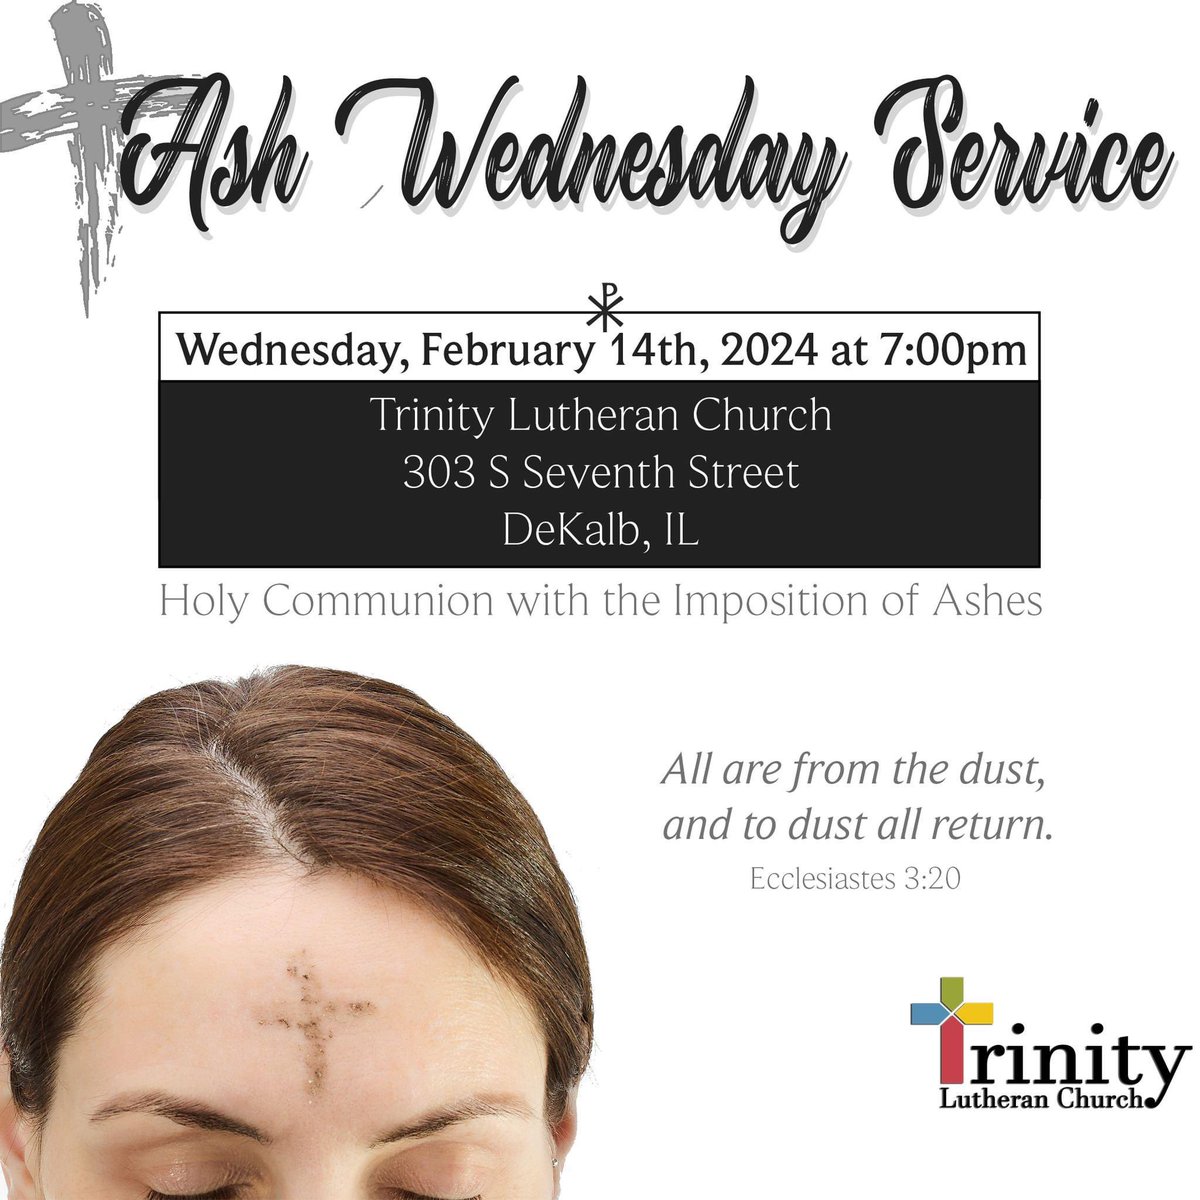 Join us for Ash Wednesday Service at 7:00pm

#dekalbil #sycamoreil #ashwednesday